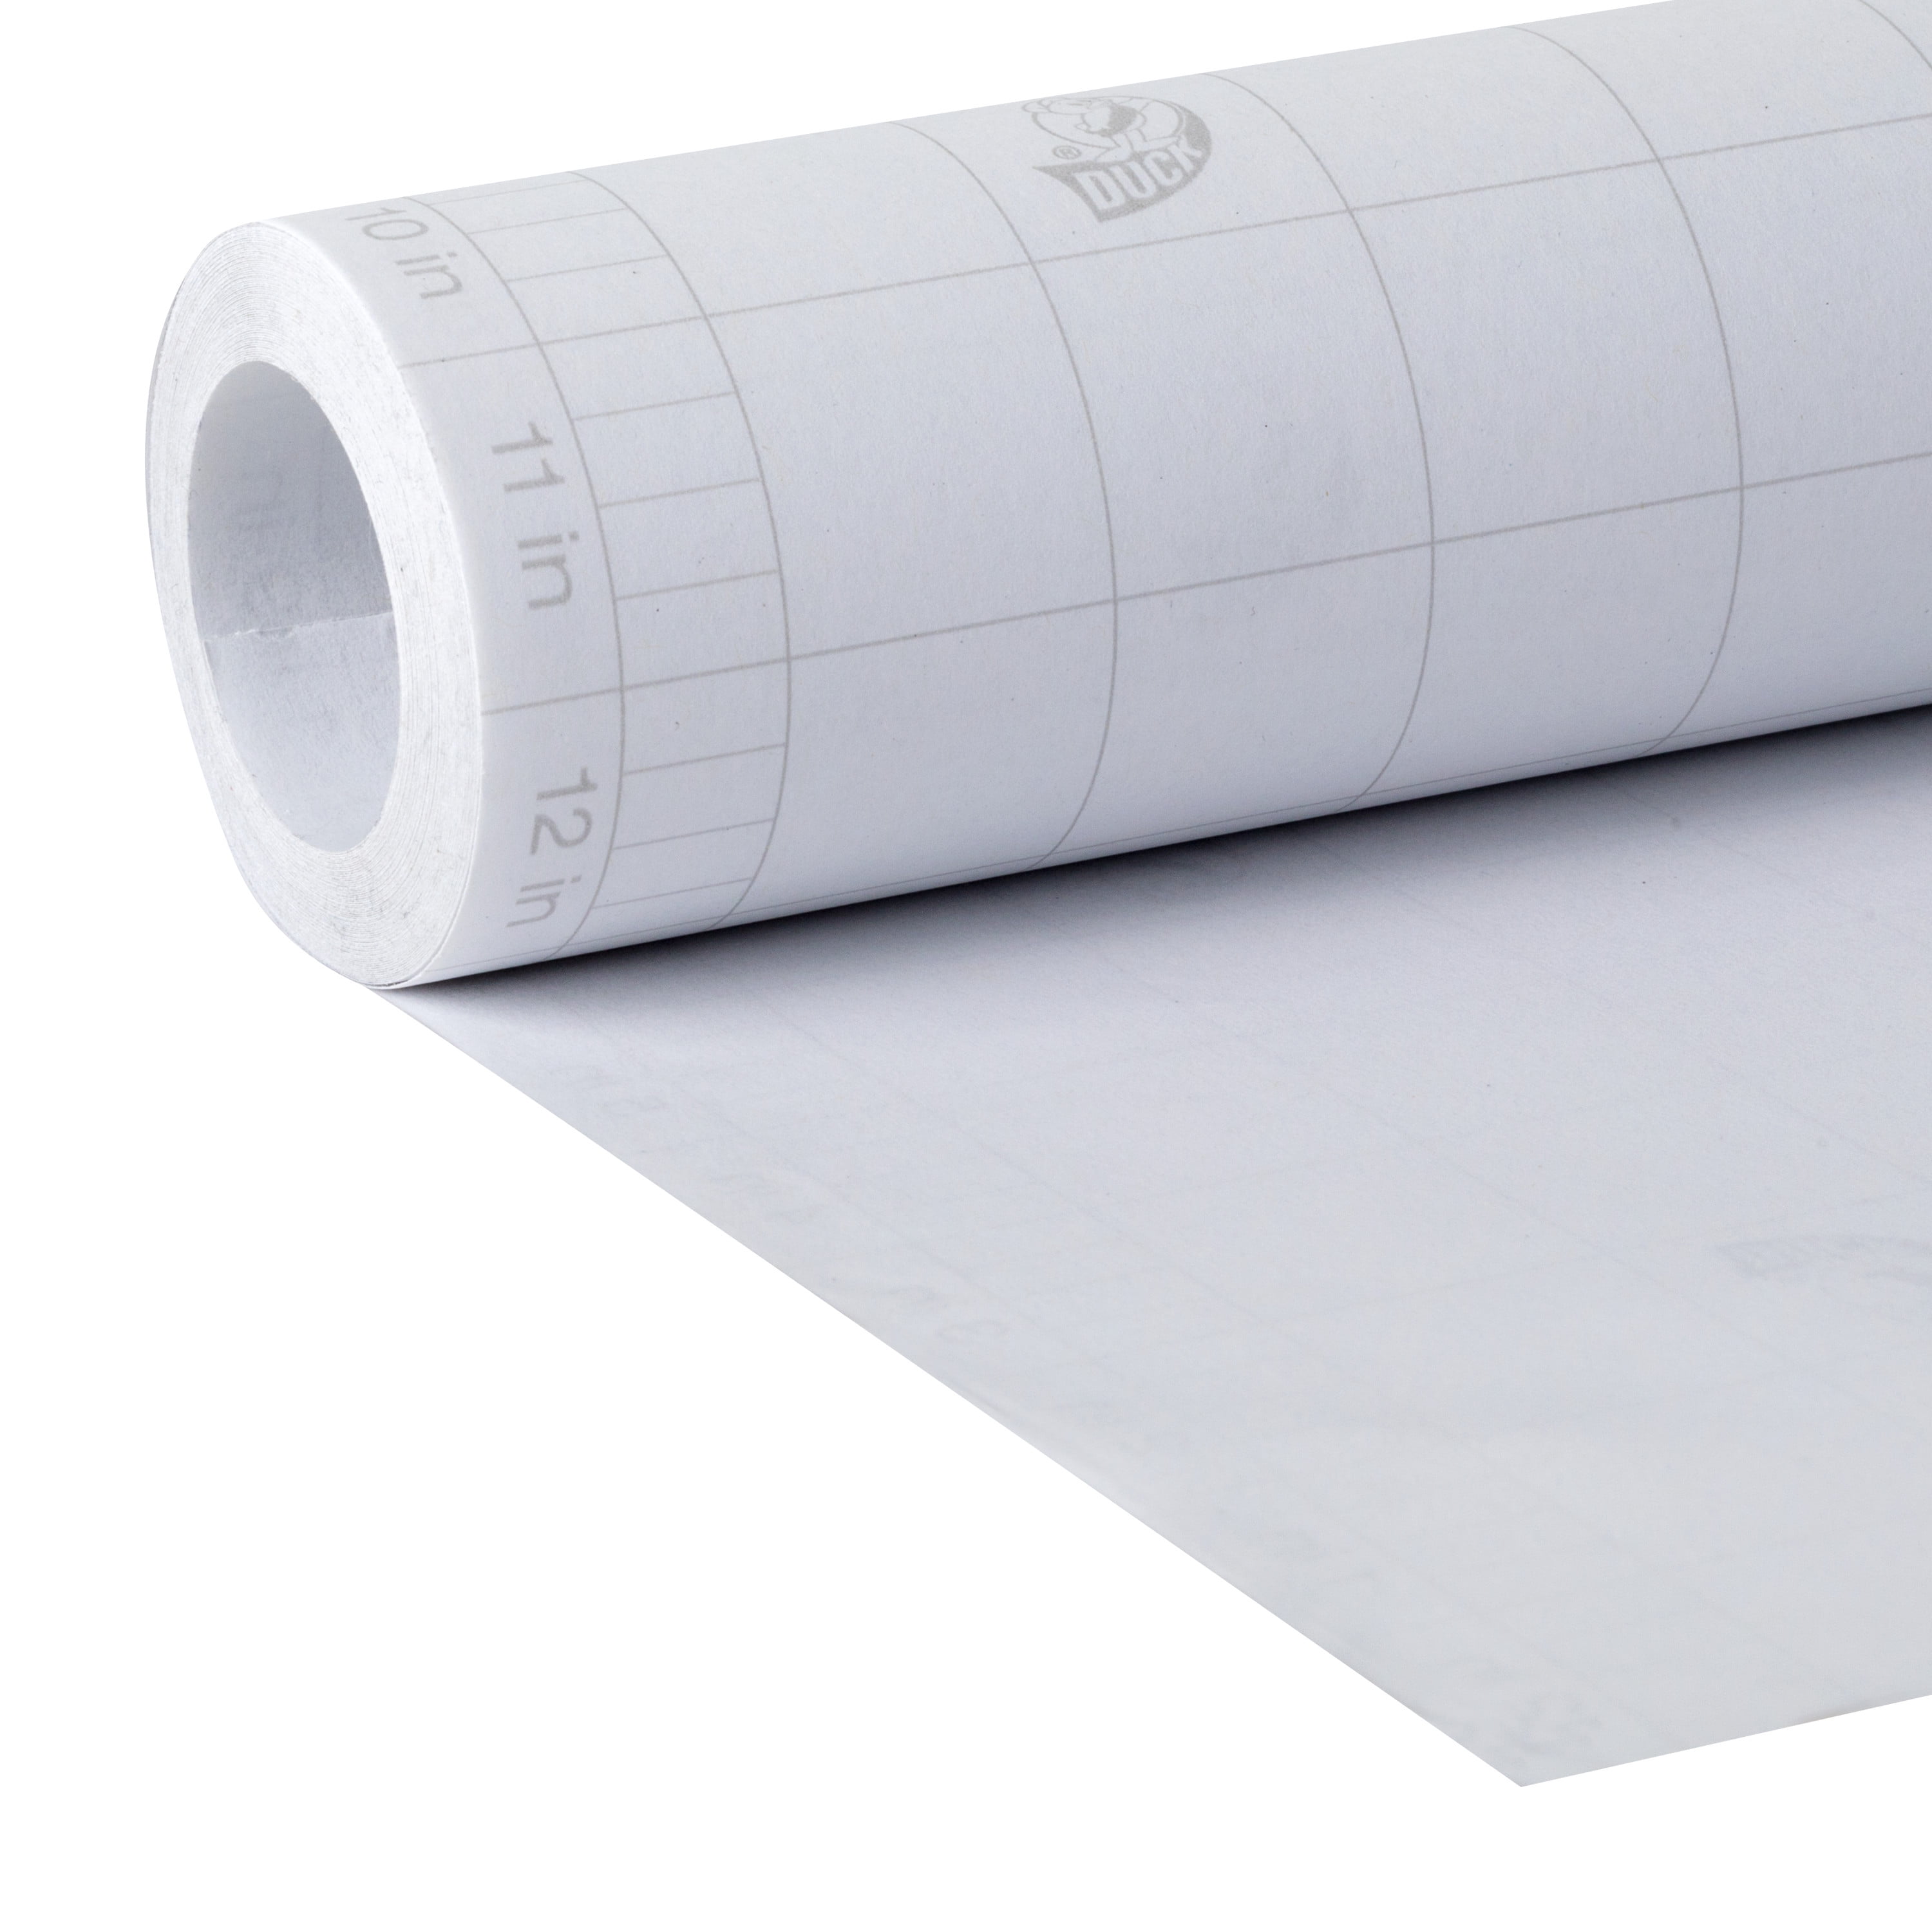 EasyLiner Brand Contact Paper Adhesive Shelf Liner, Soapstone, 20 in. x 15  ft. Roll 